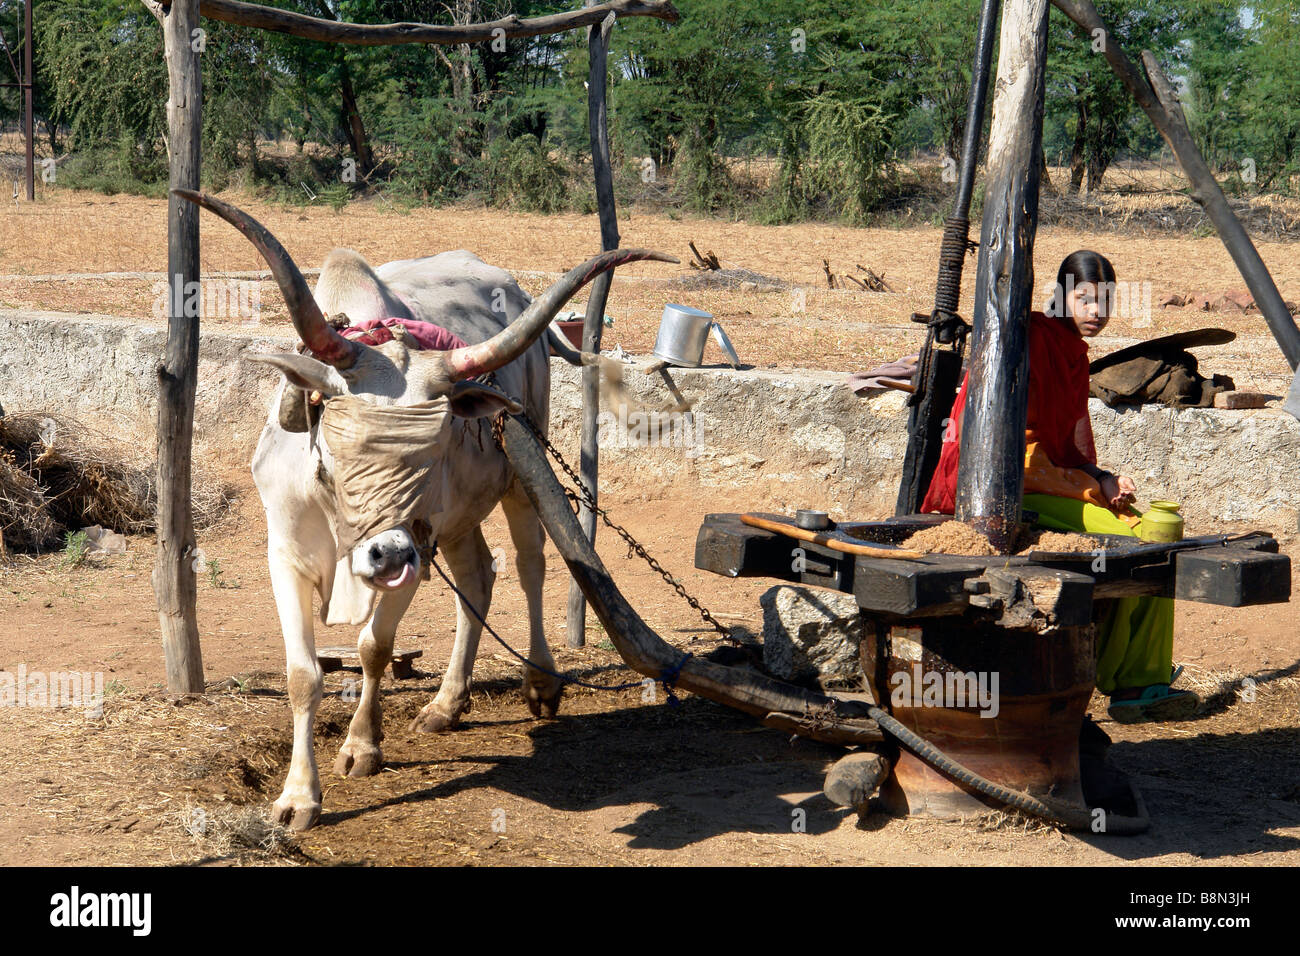 traditional indian agriculture oxen powered grain grinding milling machine Stock Photo